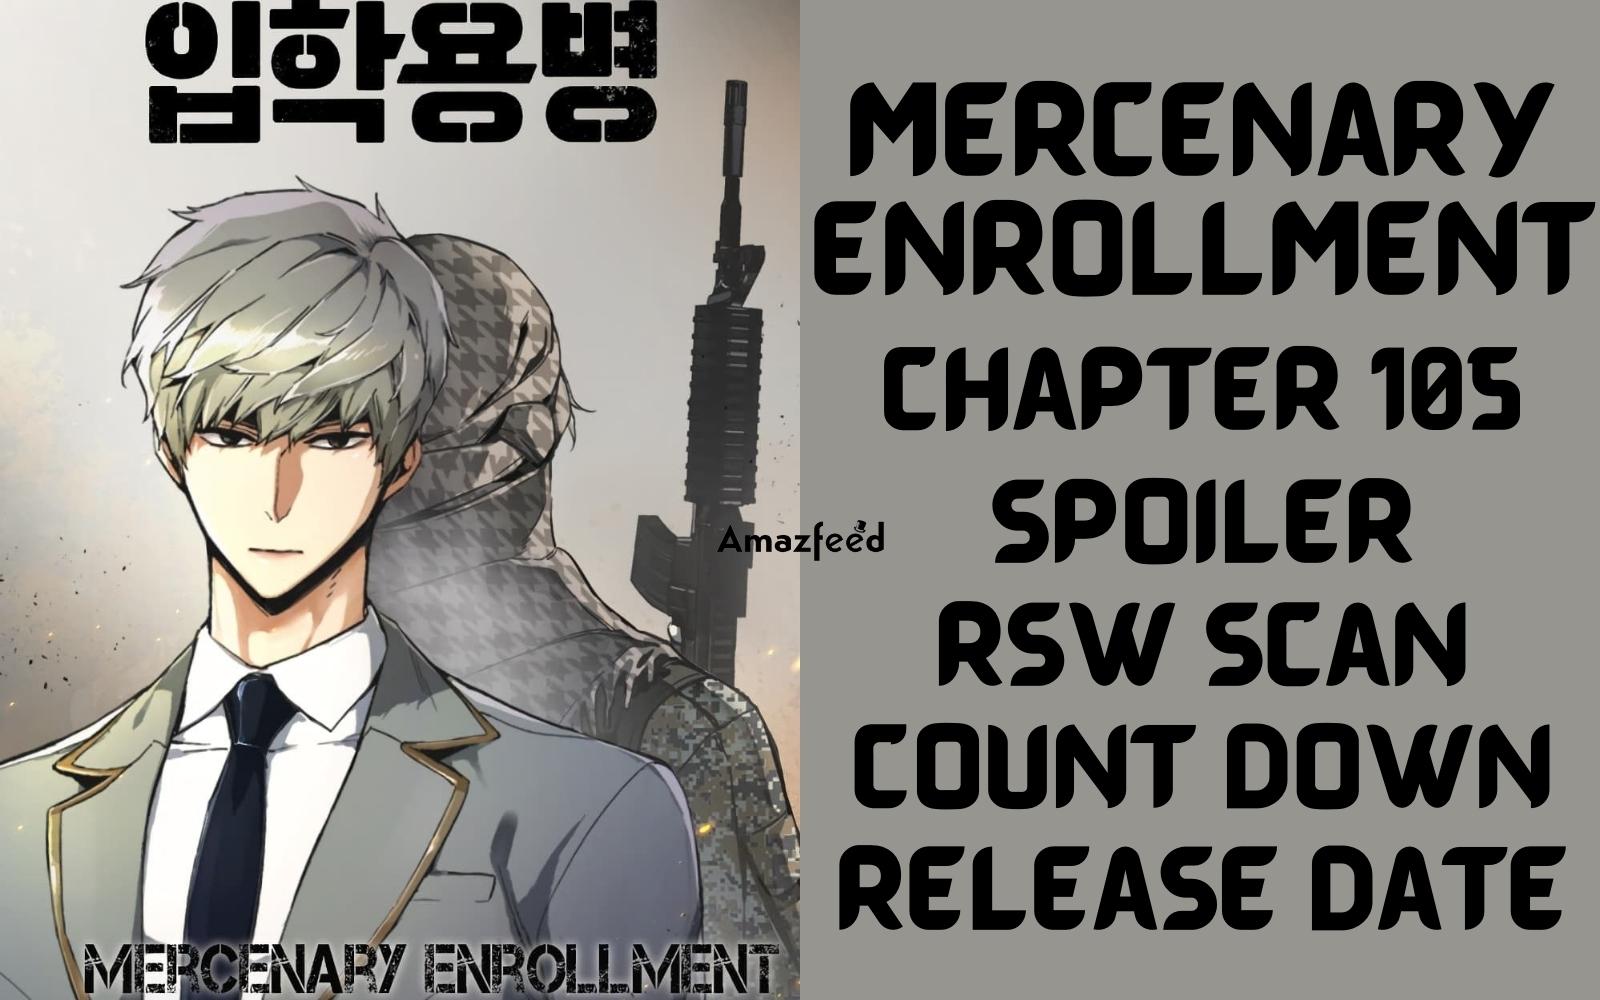 Mercenary Enrollment Chapter 105 Spoiler, Countdown, About, Synopsis, Release Date